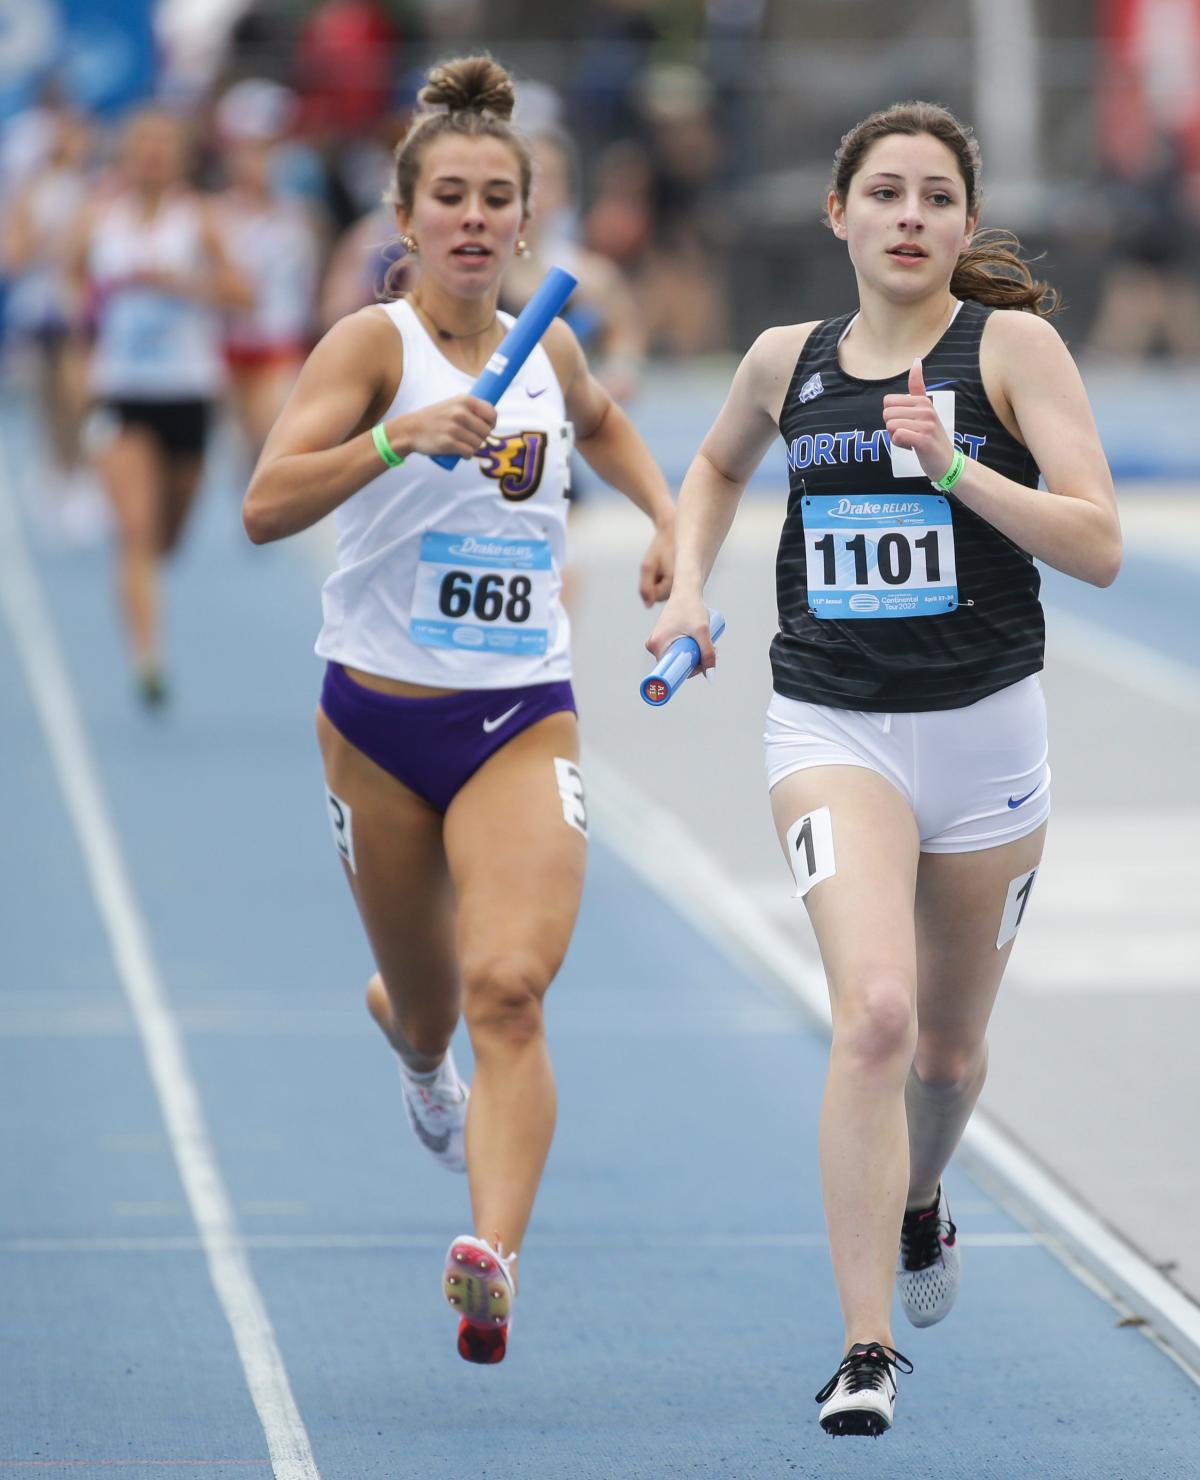 In school's first year, Waukee Northwest impresses at 2022 Drake Relays